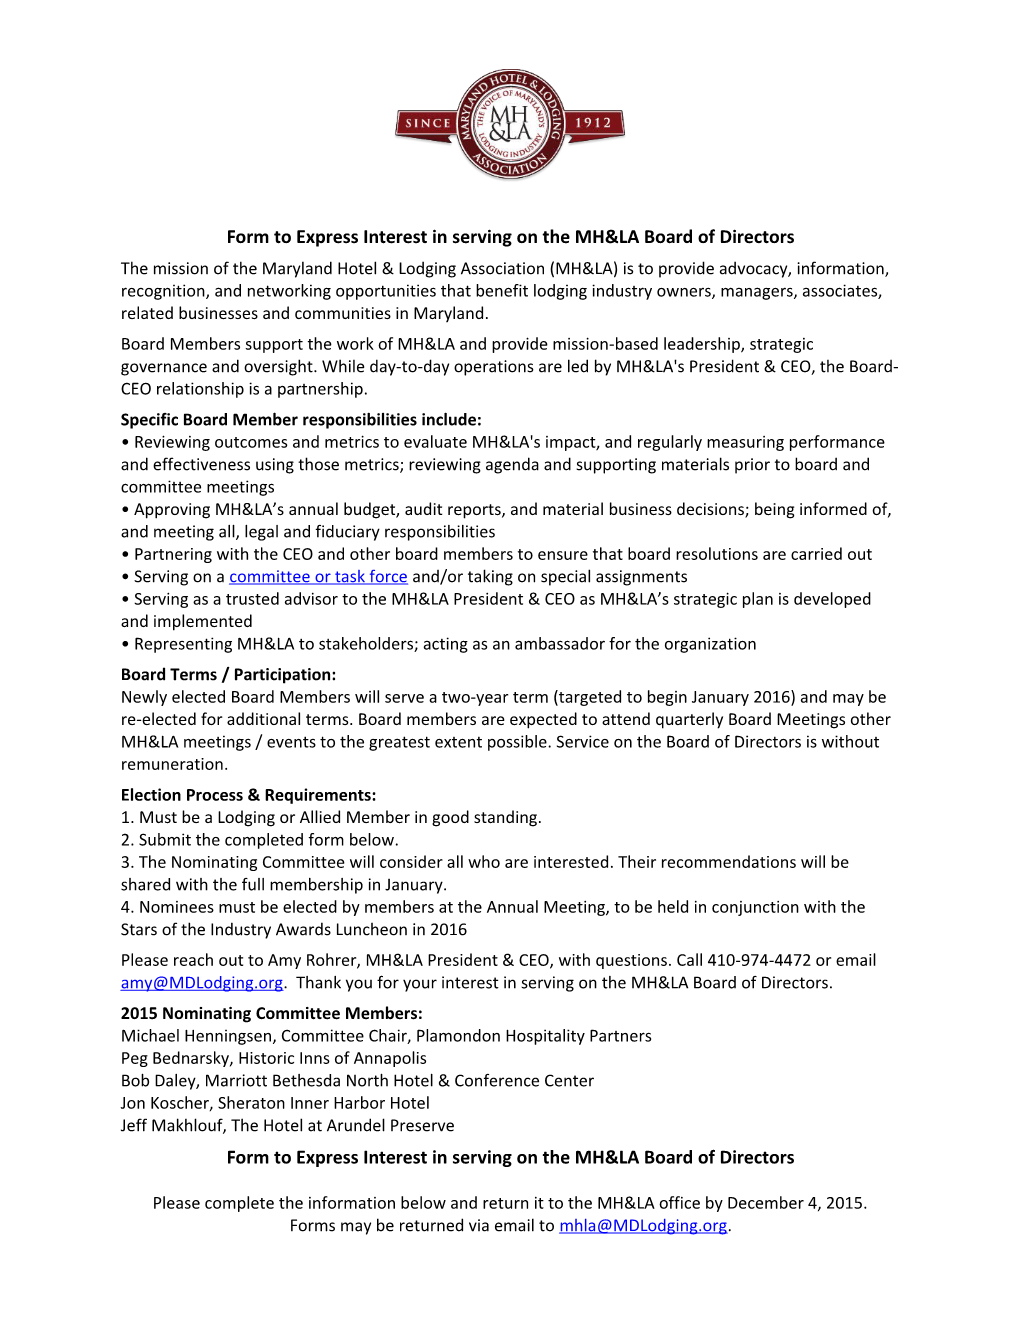 Form to Express Interest in Serving on the MH&LA Board of Directors